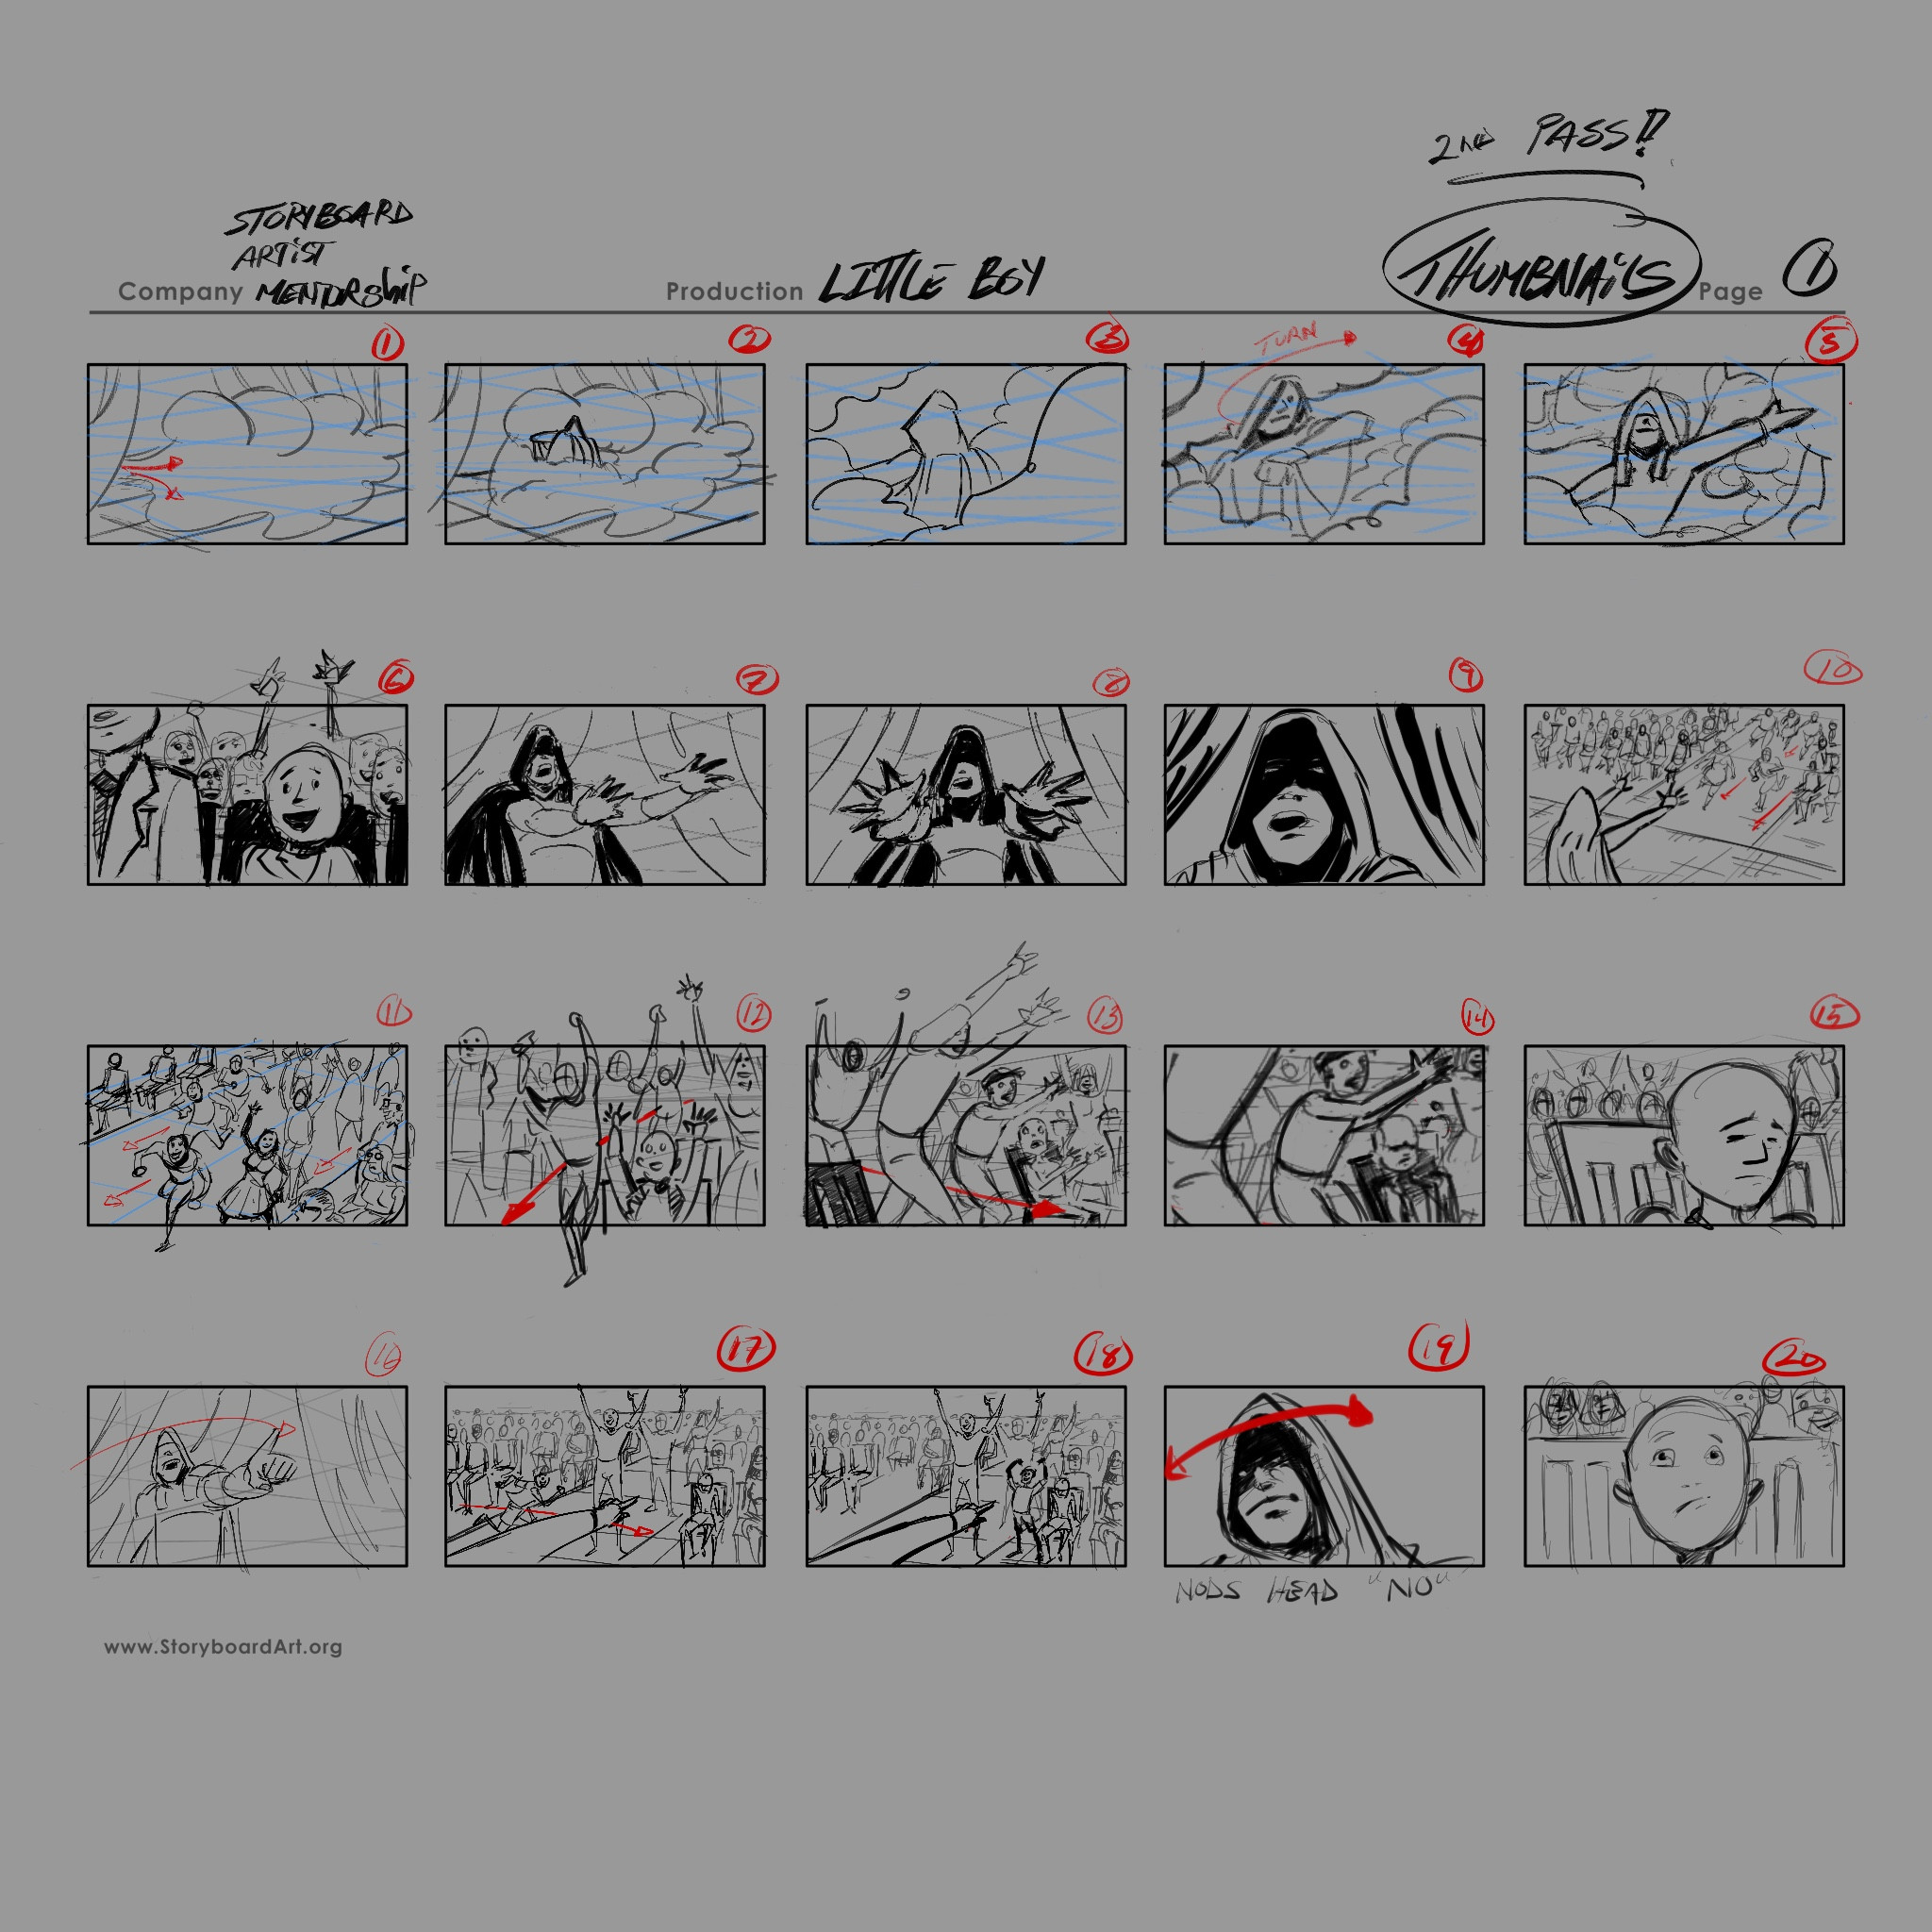 Thumbnail 2nd Pass from script Page Little Boy.